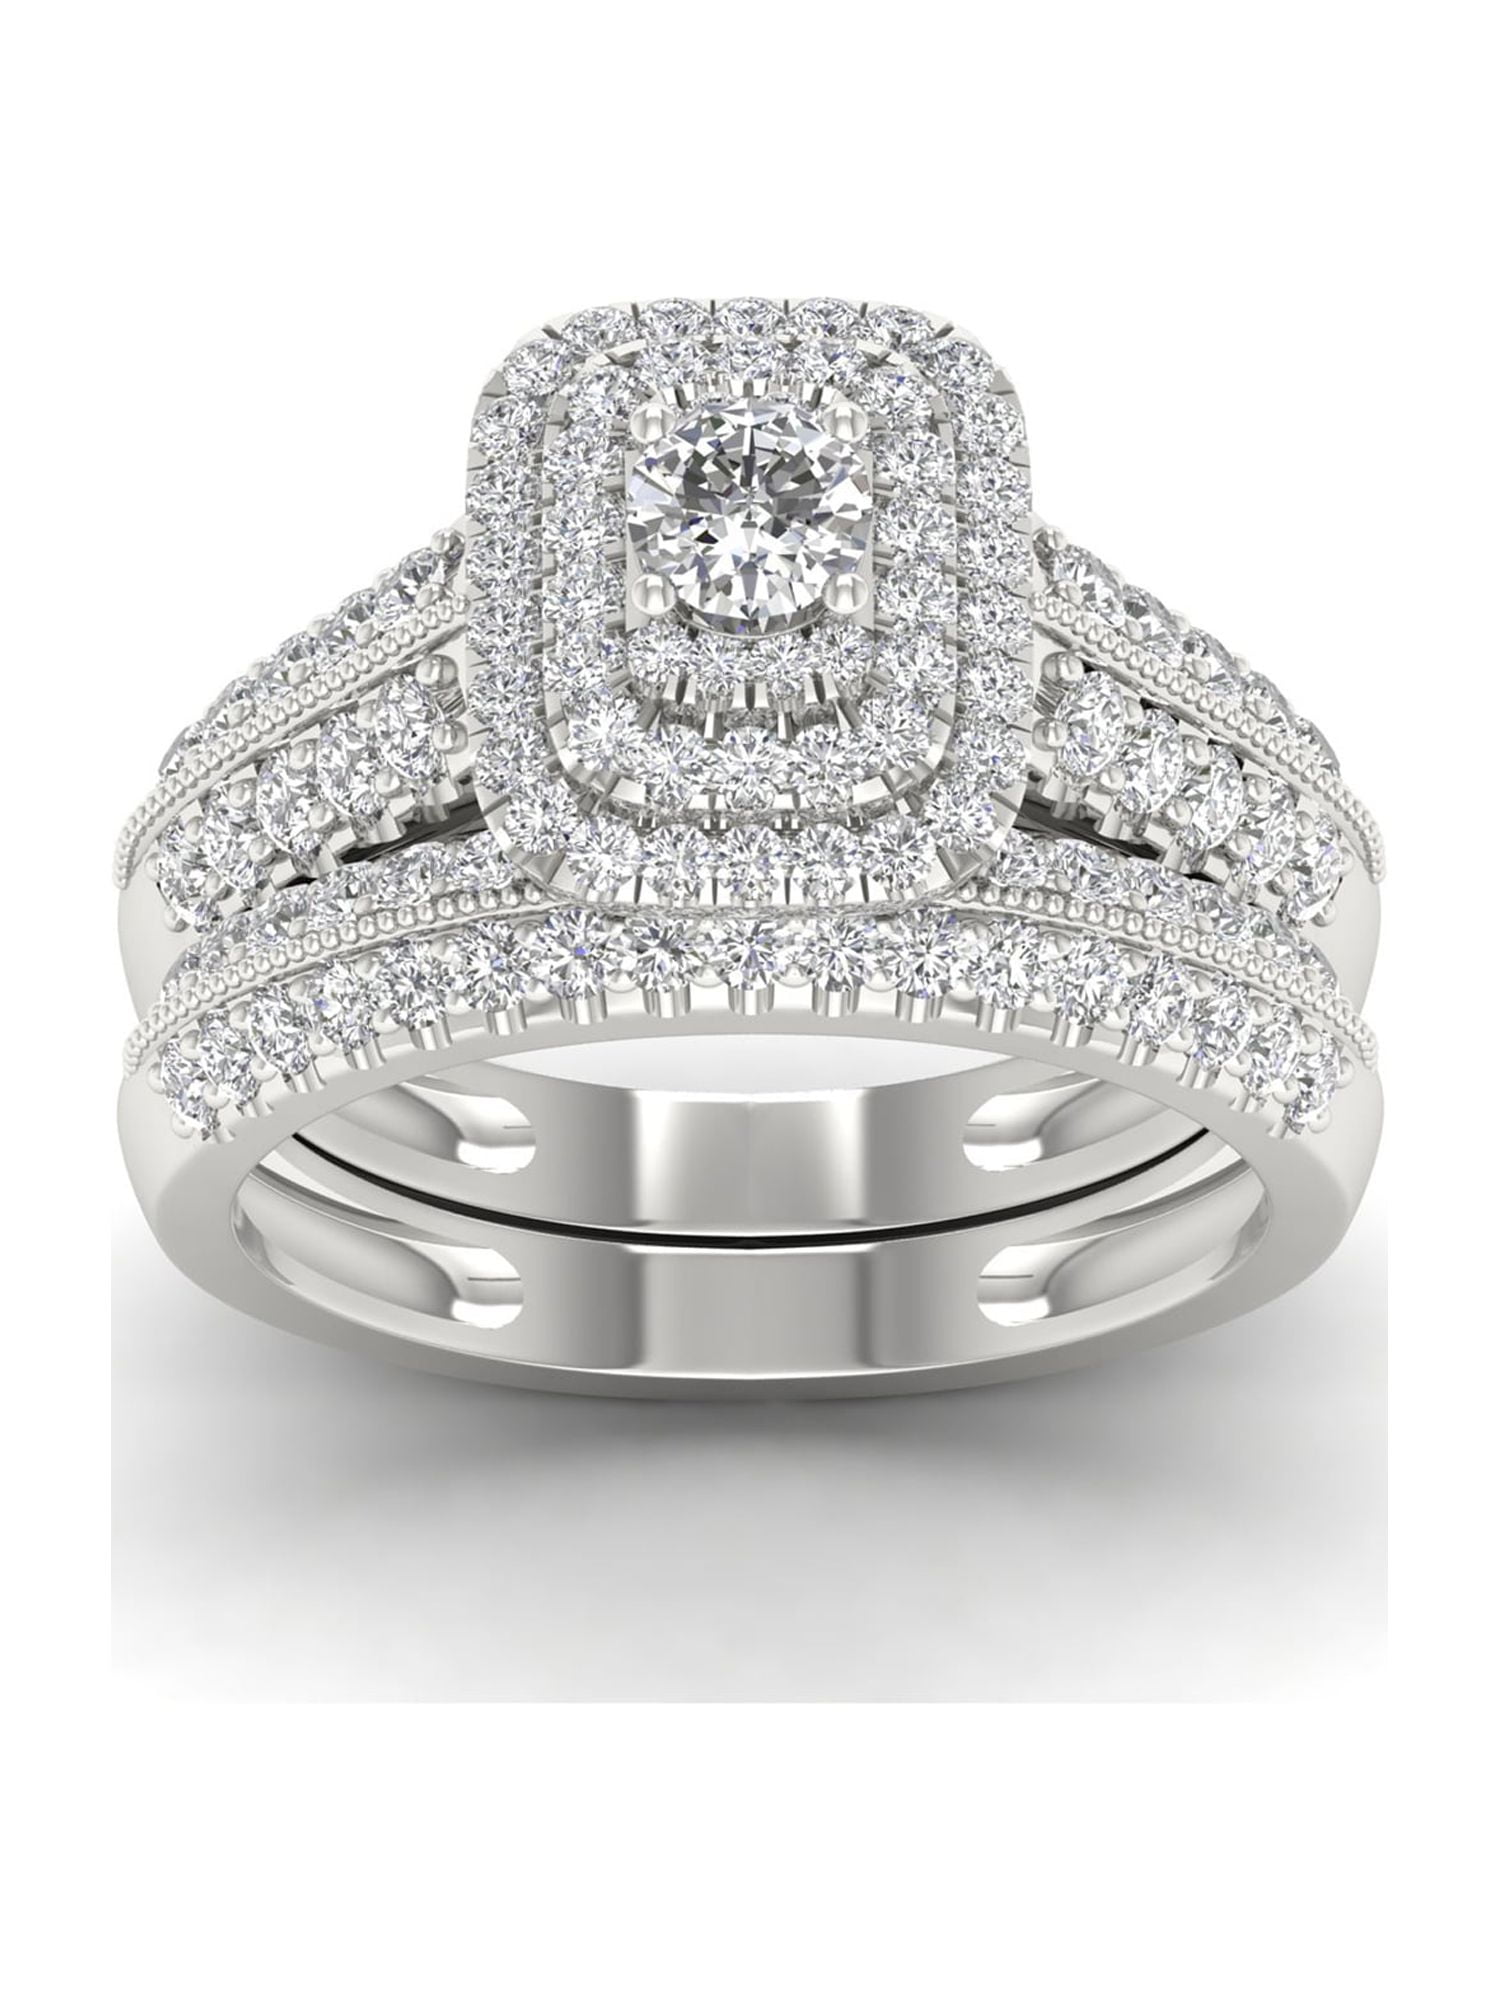 5 Reasons to Upgrade Your Engagement Ring Later Down the Line | The Diamond  Store